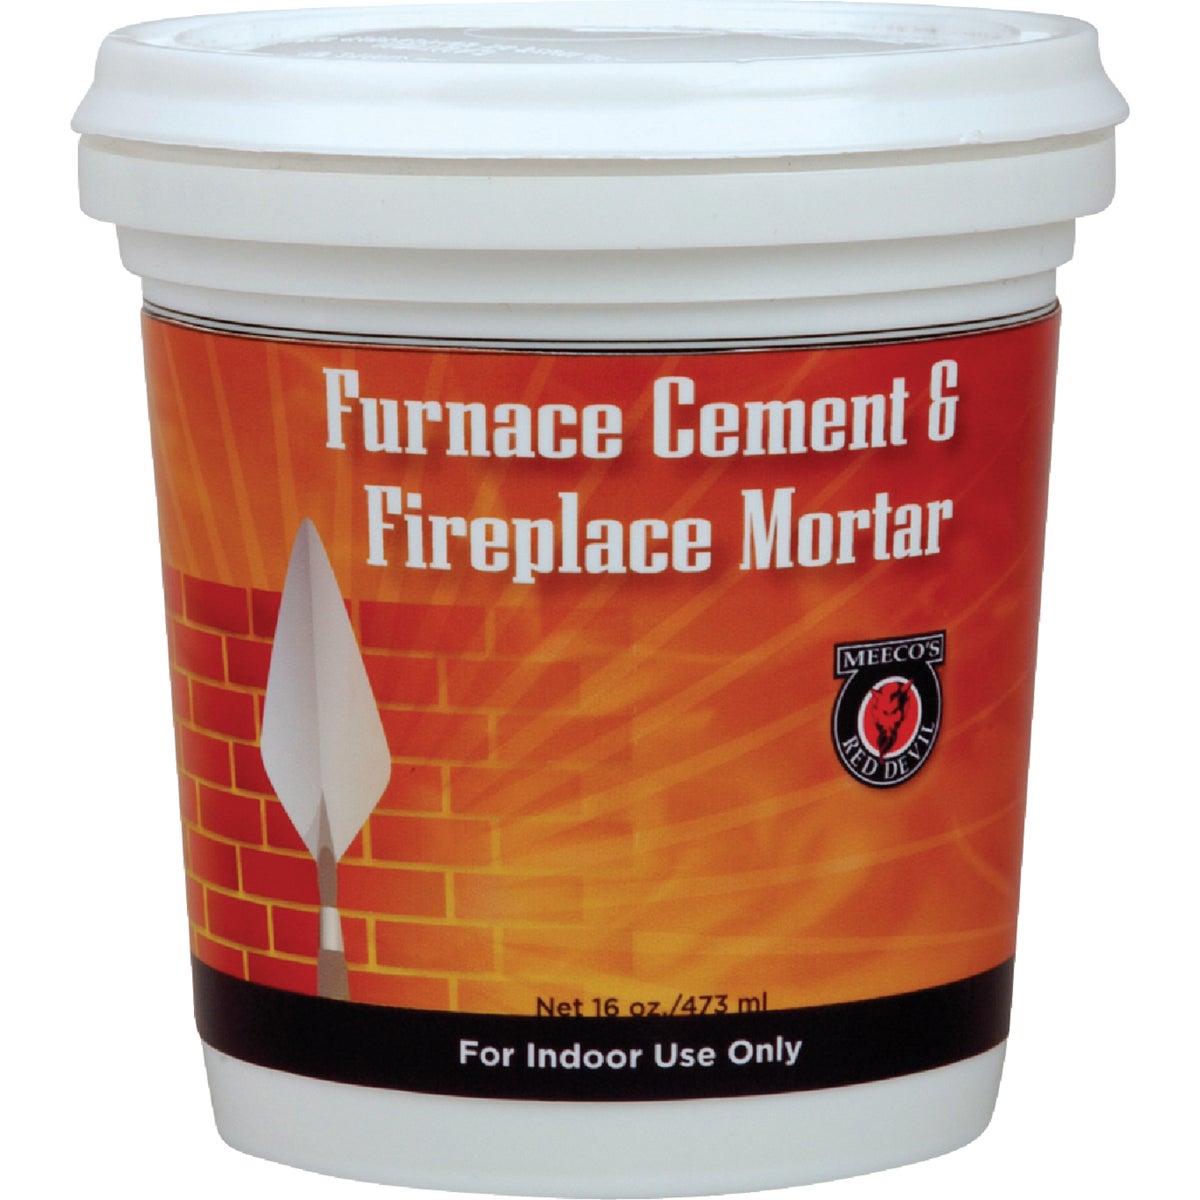 Item 401666, Pre-mixed, ready-to-use high temperature silicate formula.